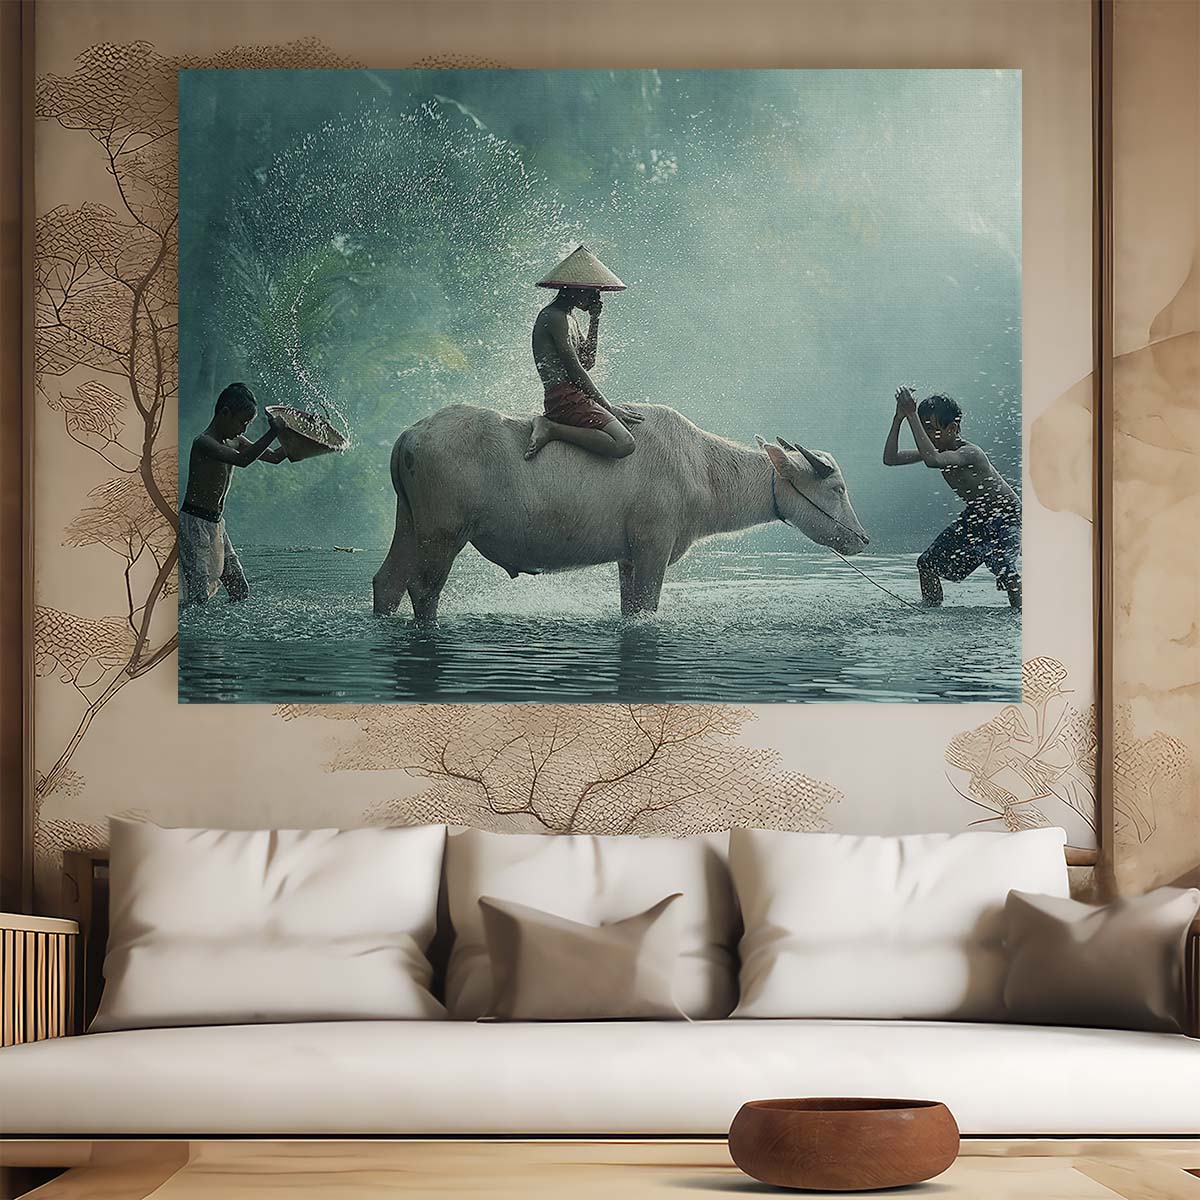 Indonesian Water Buffalo Playtime River Scene Wall Art by Luxuriance Designs. Made in USA.